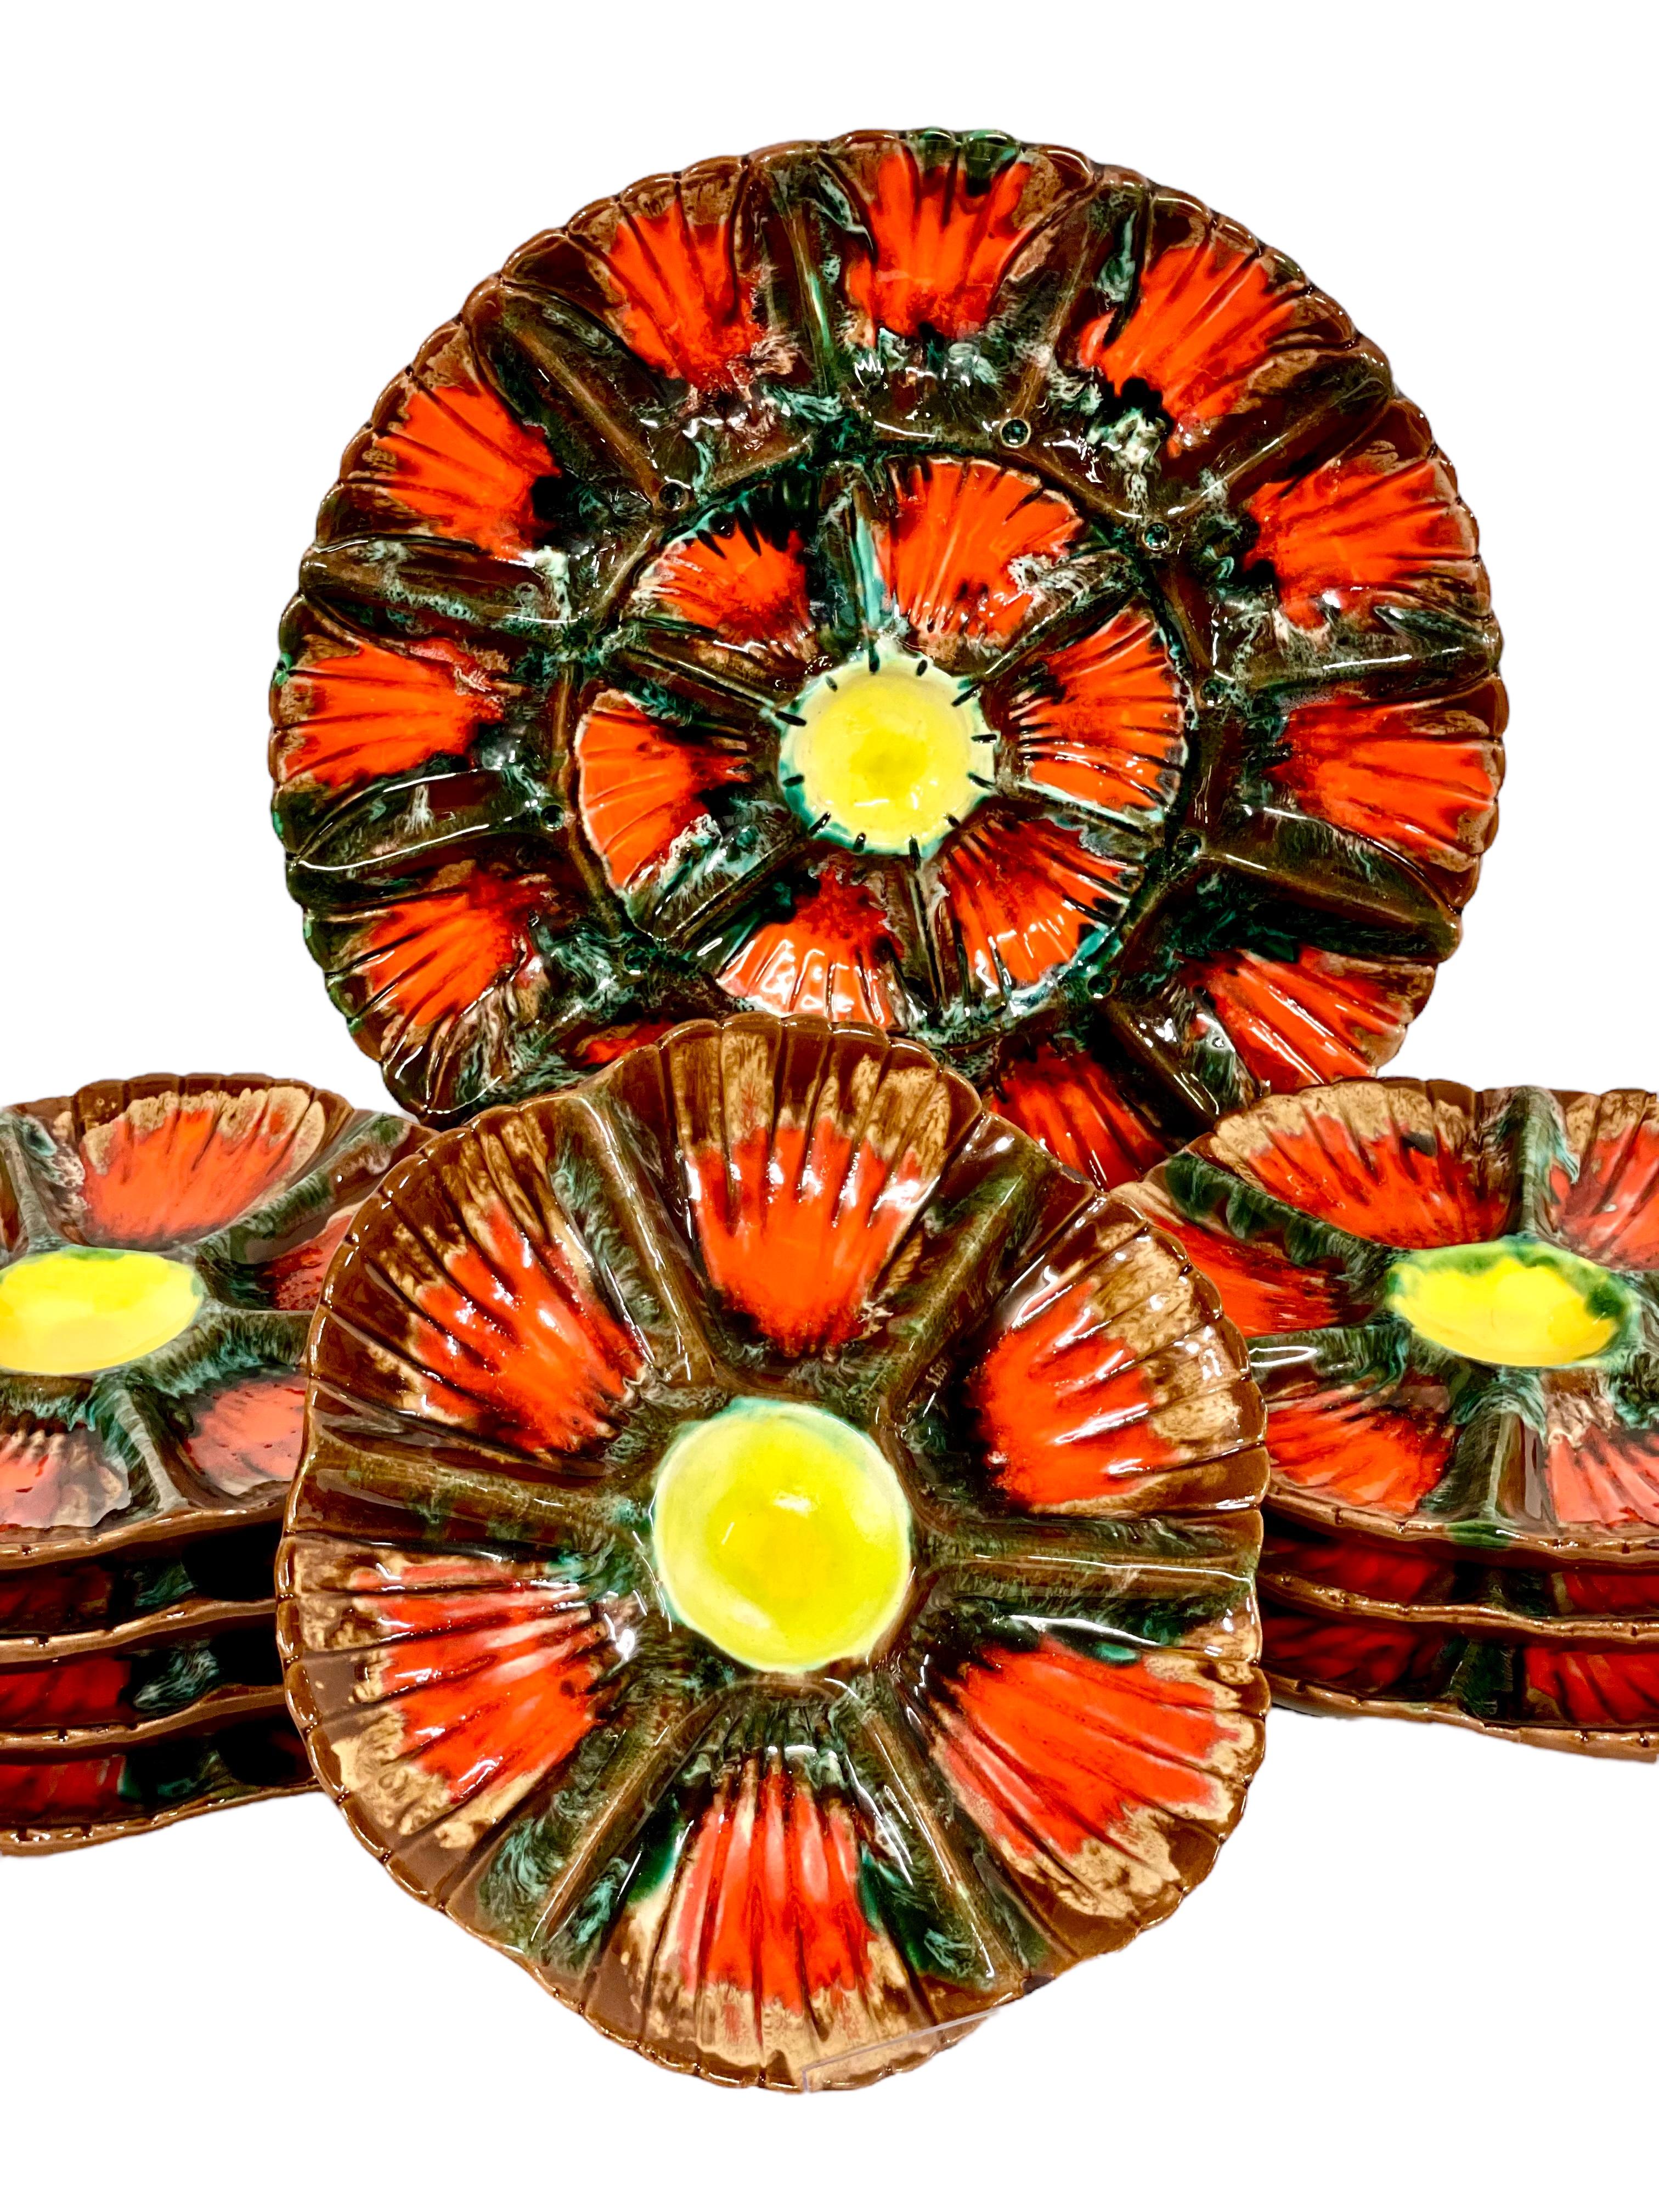 A very eye-catching set of eight Vallauris-style ceramic oyster plates and a serving dish decorated in vibrant polychrome enamel in wonderful shades of chocolate, crimson and yellow. Each of the smaller dishes is divided into sections, and is